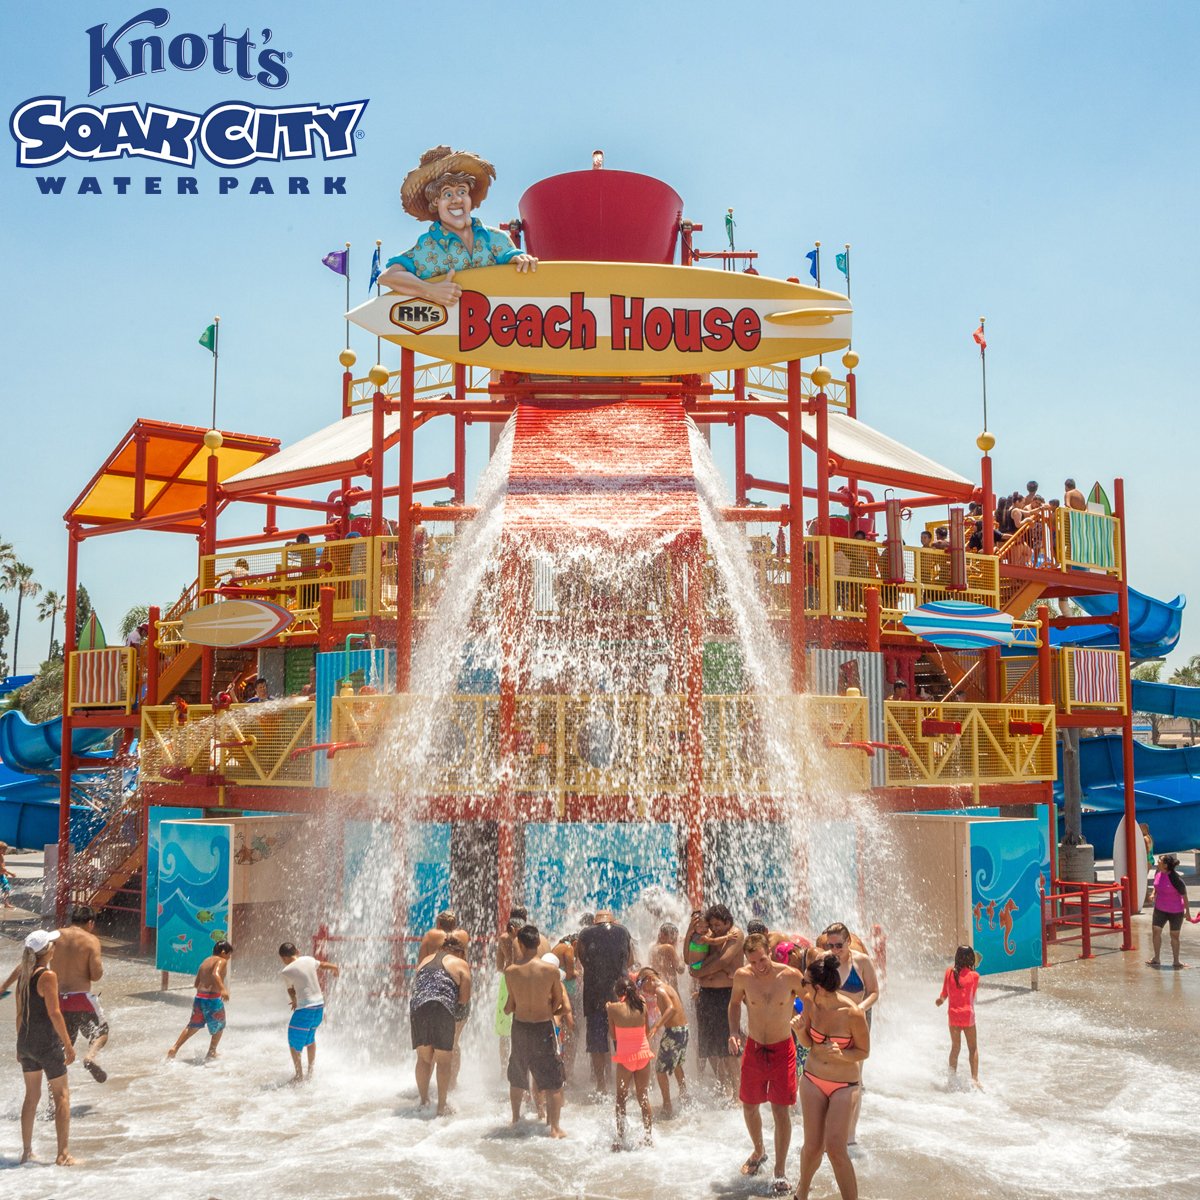 Its definitely a #KnottsSoakCity kind of day. 🌞🌊😎
Don't forget, Gold and Platinum Passholders can enter Knott's Soak City Water Park starting at 9am on weekends, now through August 5.